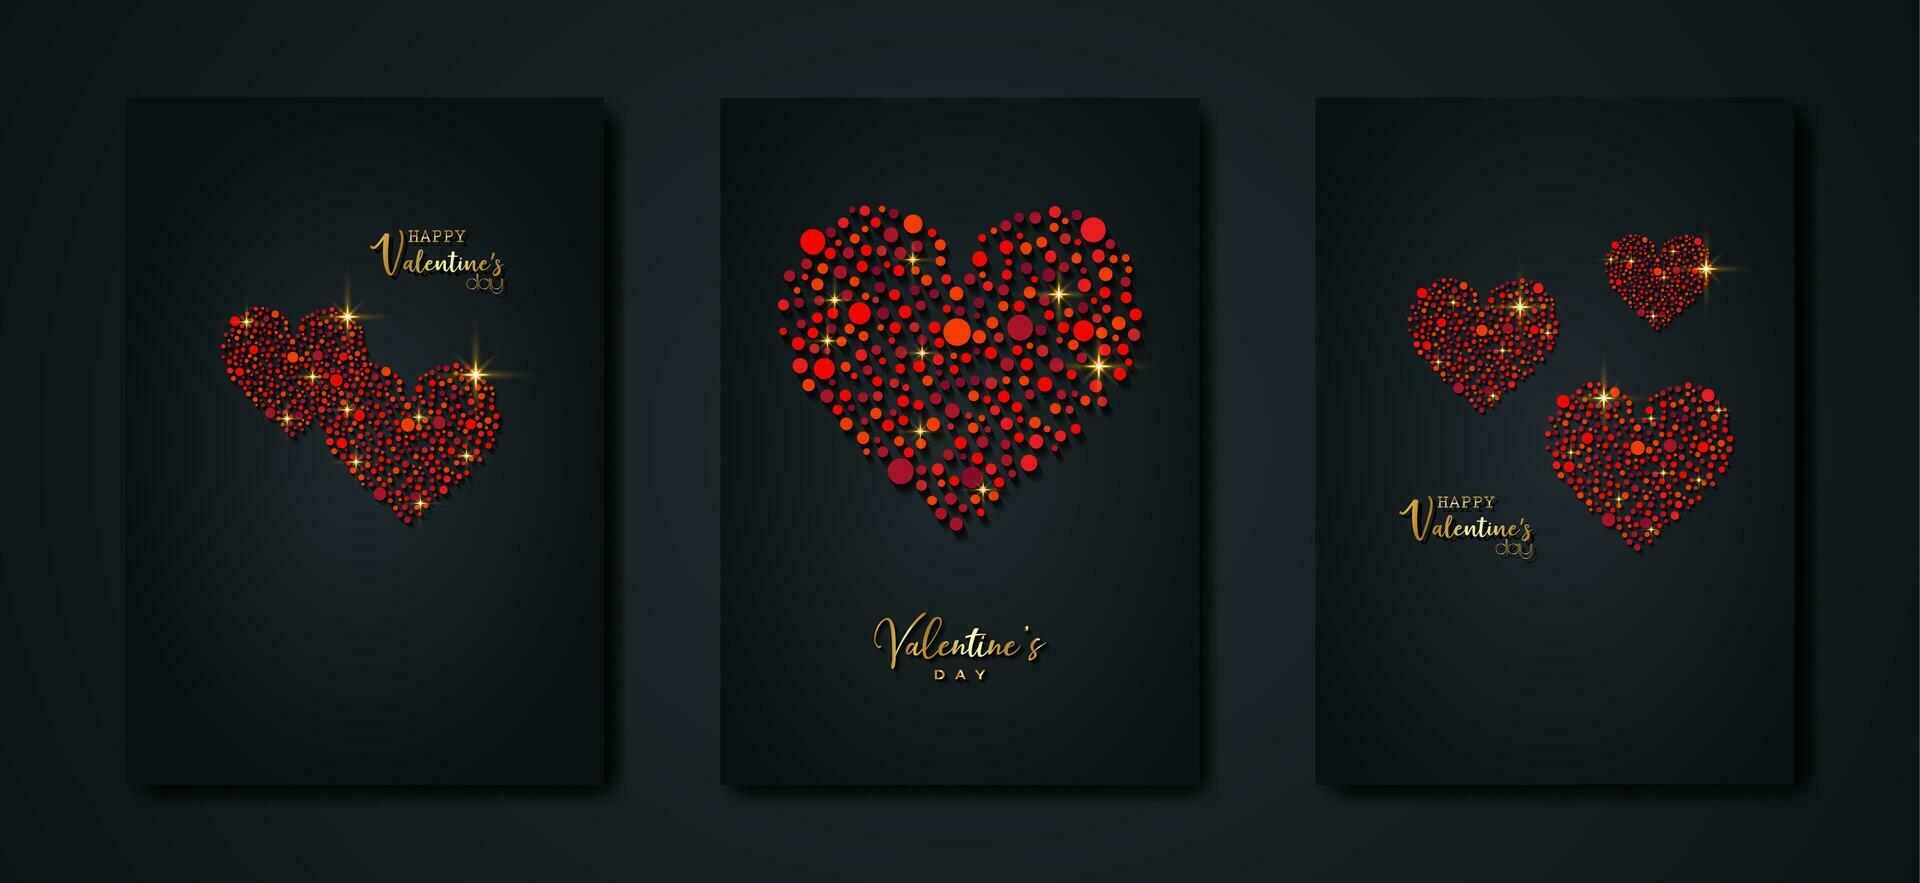 Happy Valentines day vector set greeting card. Red glitter hearts on black background. Holiday poster with gold text, jewels. Concept for Valentines banner, flyer, party invitation, jewelry gift shop